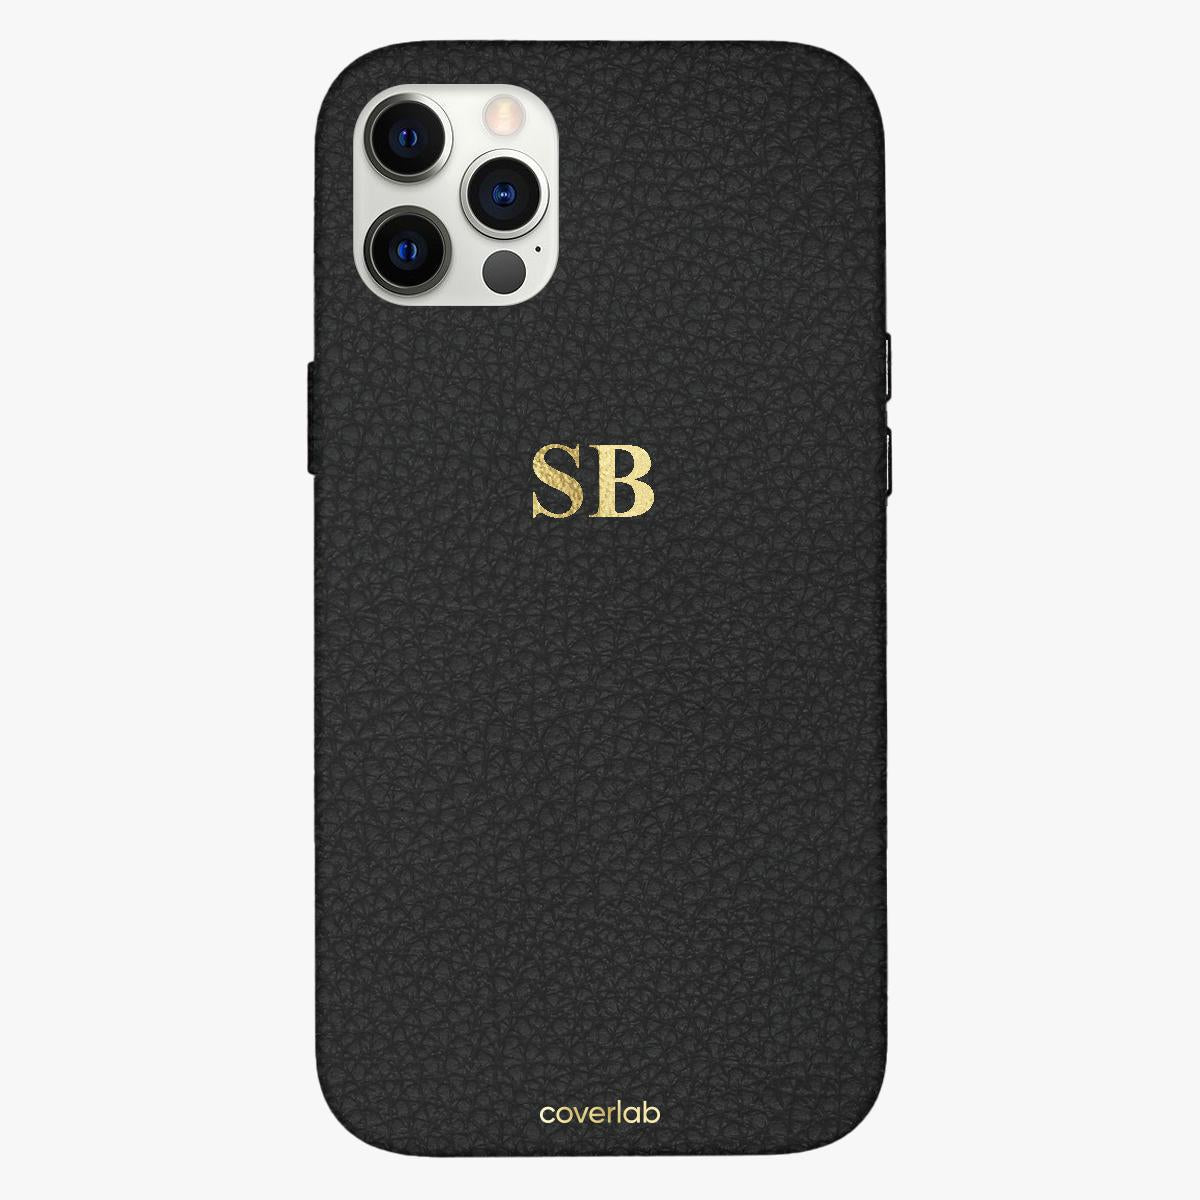 Personalised Leather iPhone 11 Pro Max Case